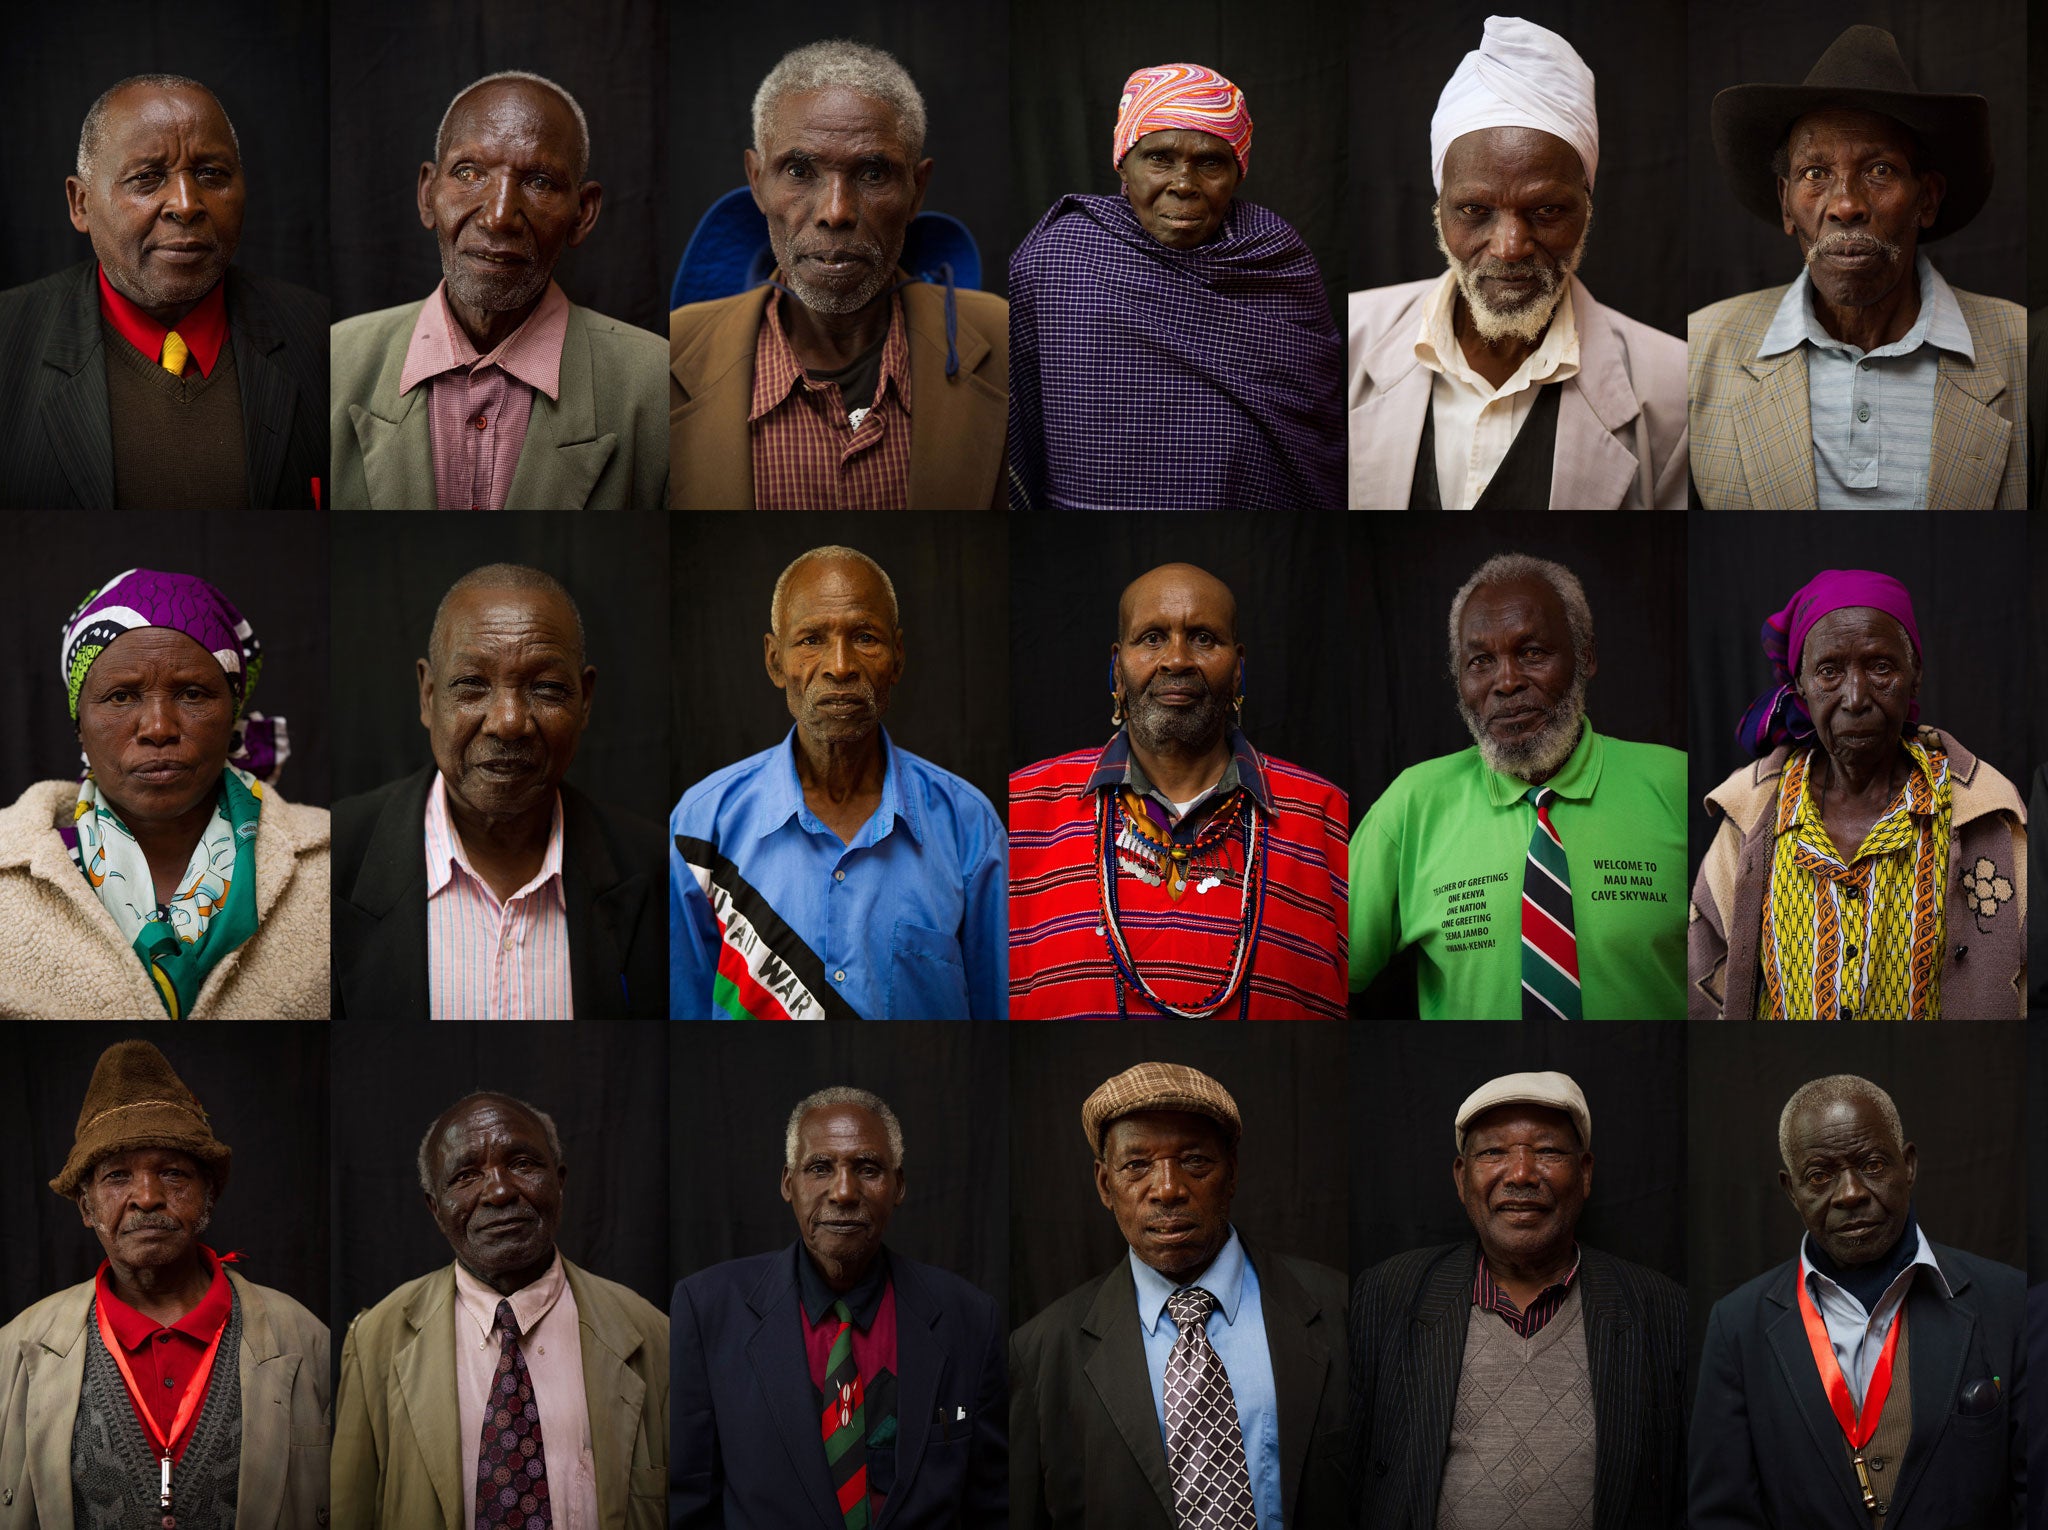 A composite image shows 24 Mau Mau veterans who posed individually for portraits at the Hilton Hotel in Nairobi, Kenya, during a press conference by the British High Commission, the law firm Leigh Day, and the Mau Mau War Veterans' Association on June 6, 2013.